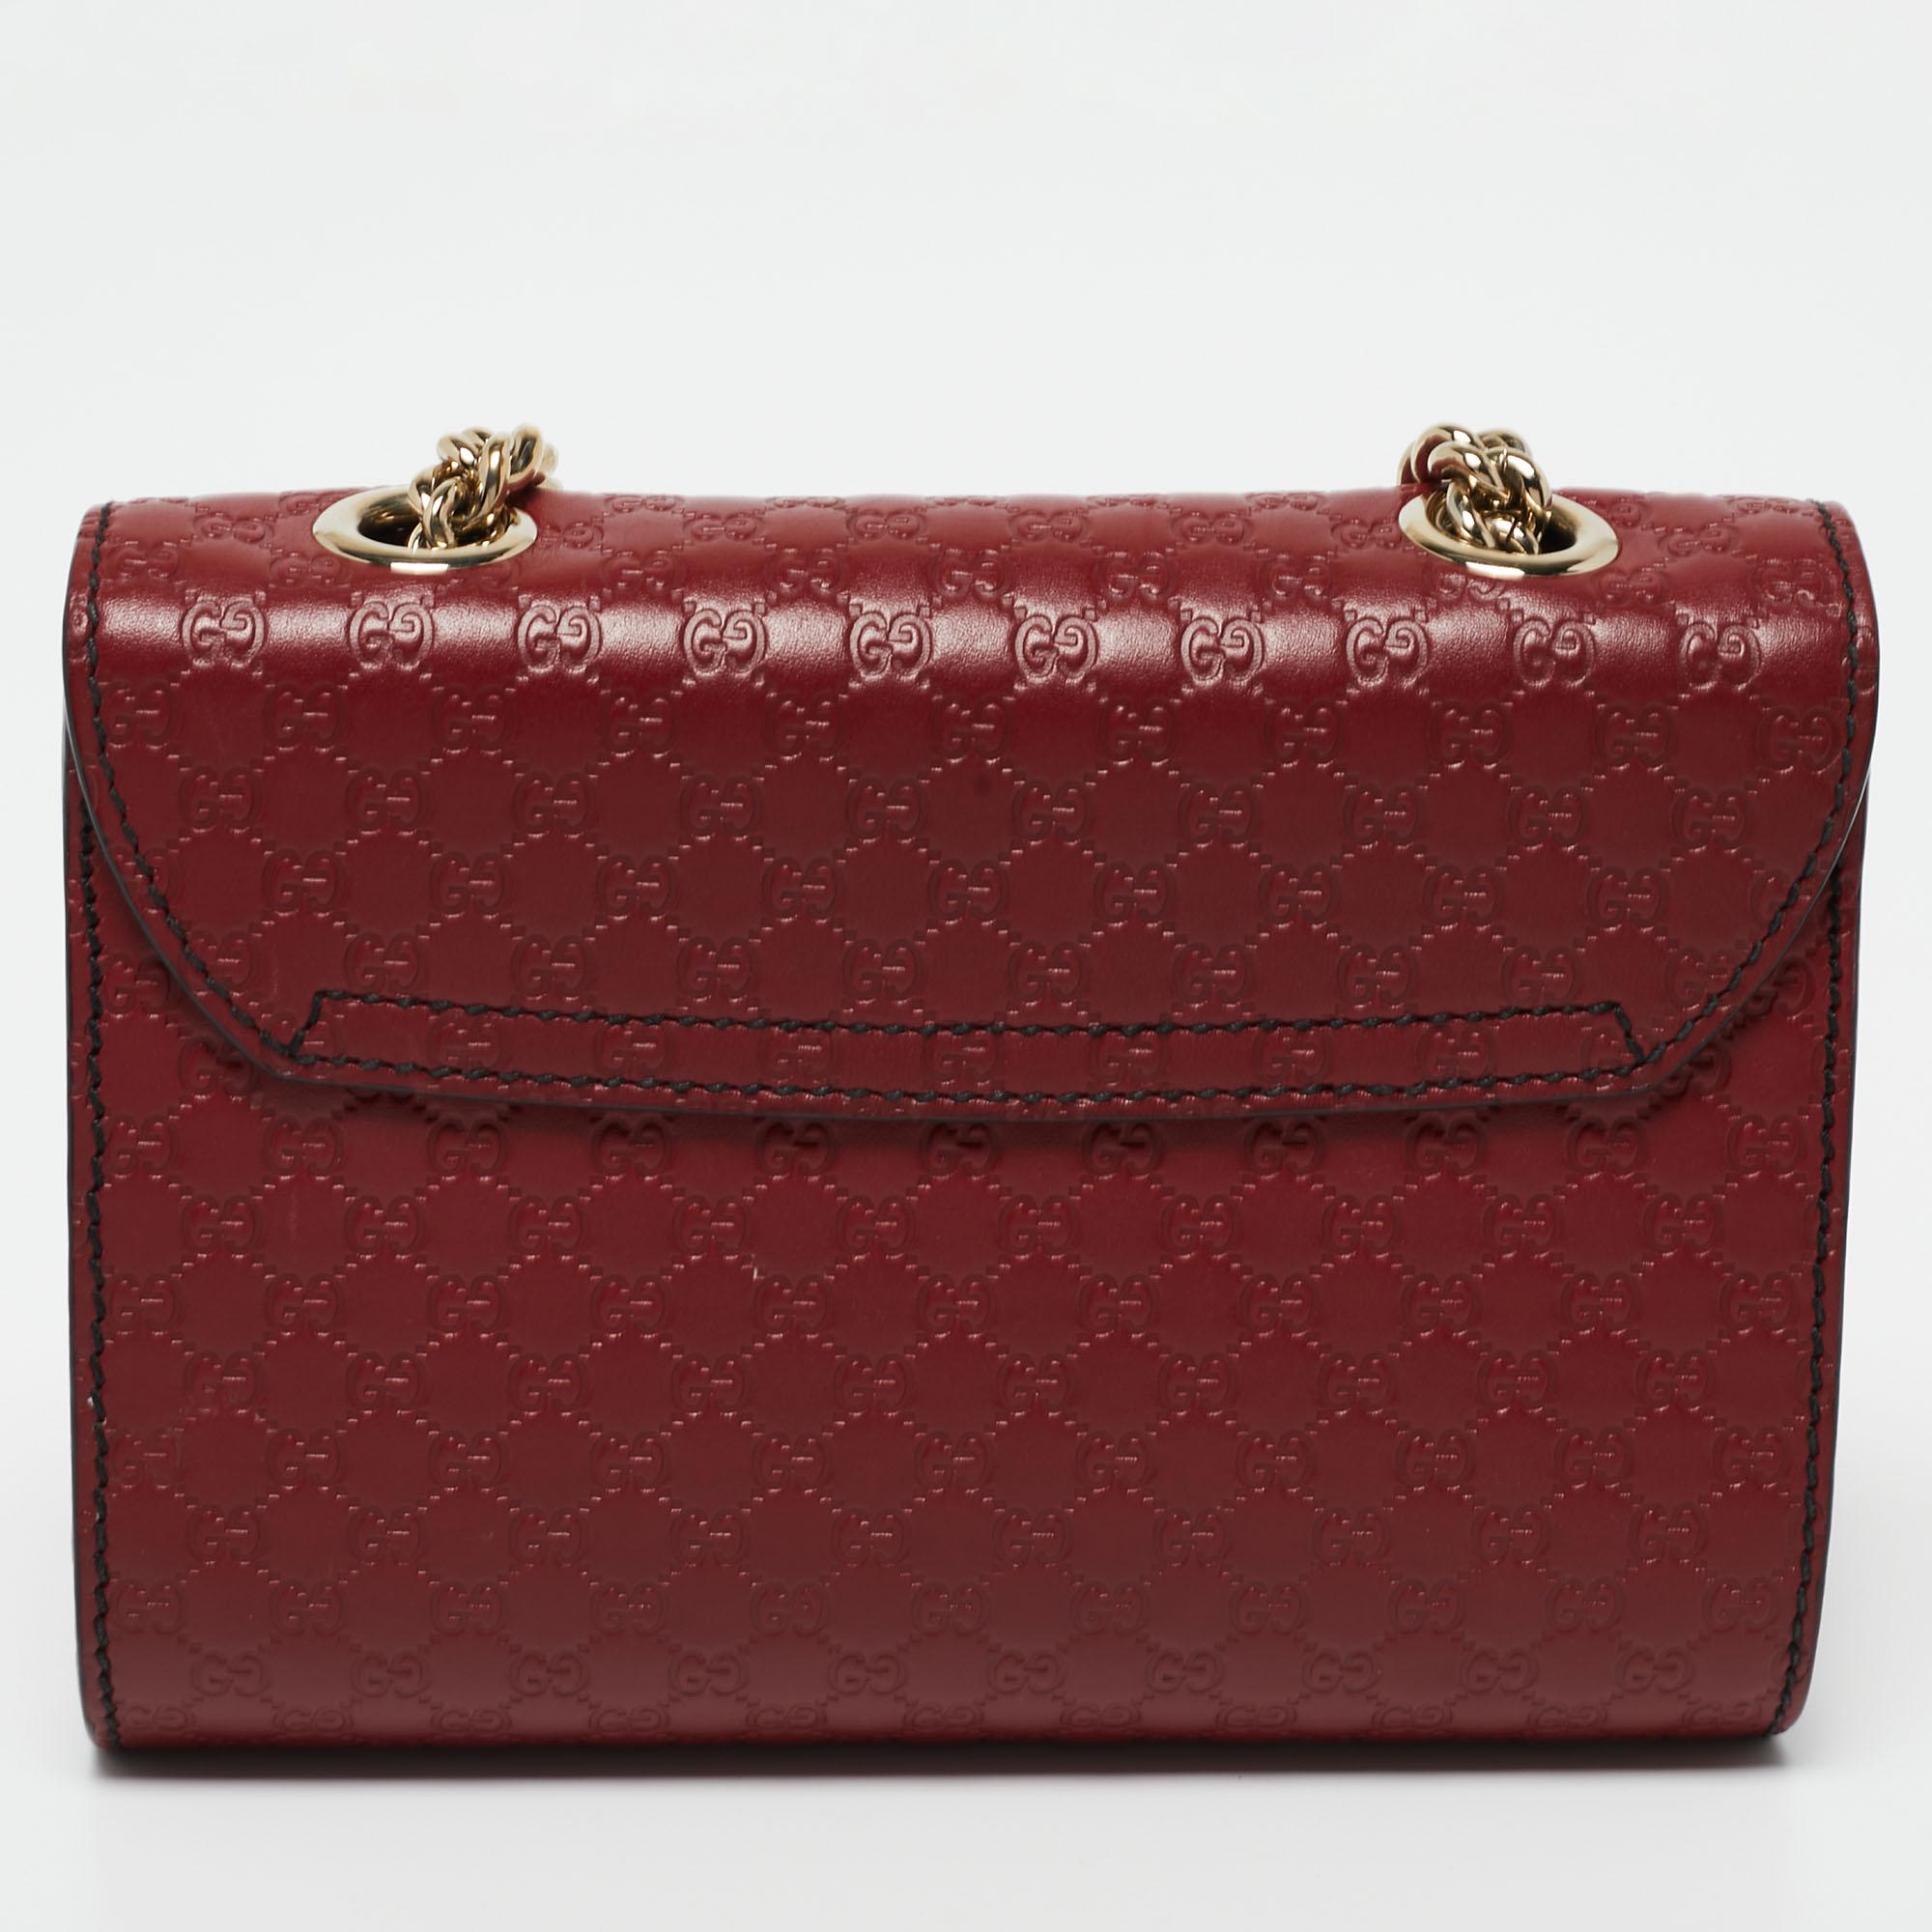 The House of Gucci, with its nonpareil skill and métier, amazes us all once again. This Emily shoulder bag from Gucci brings a different level of luxury and poise to your collection. Designed using burgundy Microguccissima leather, the front of this